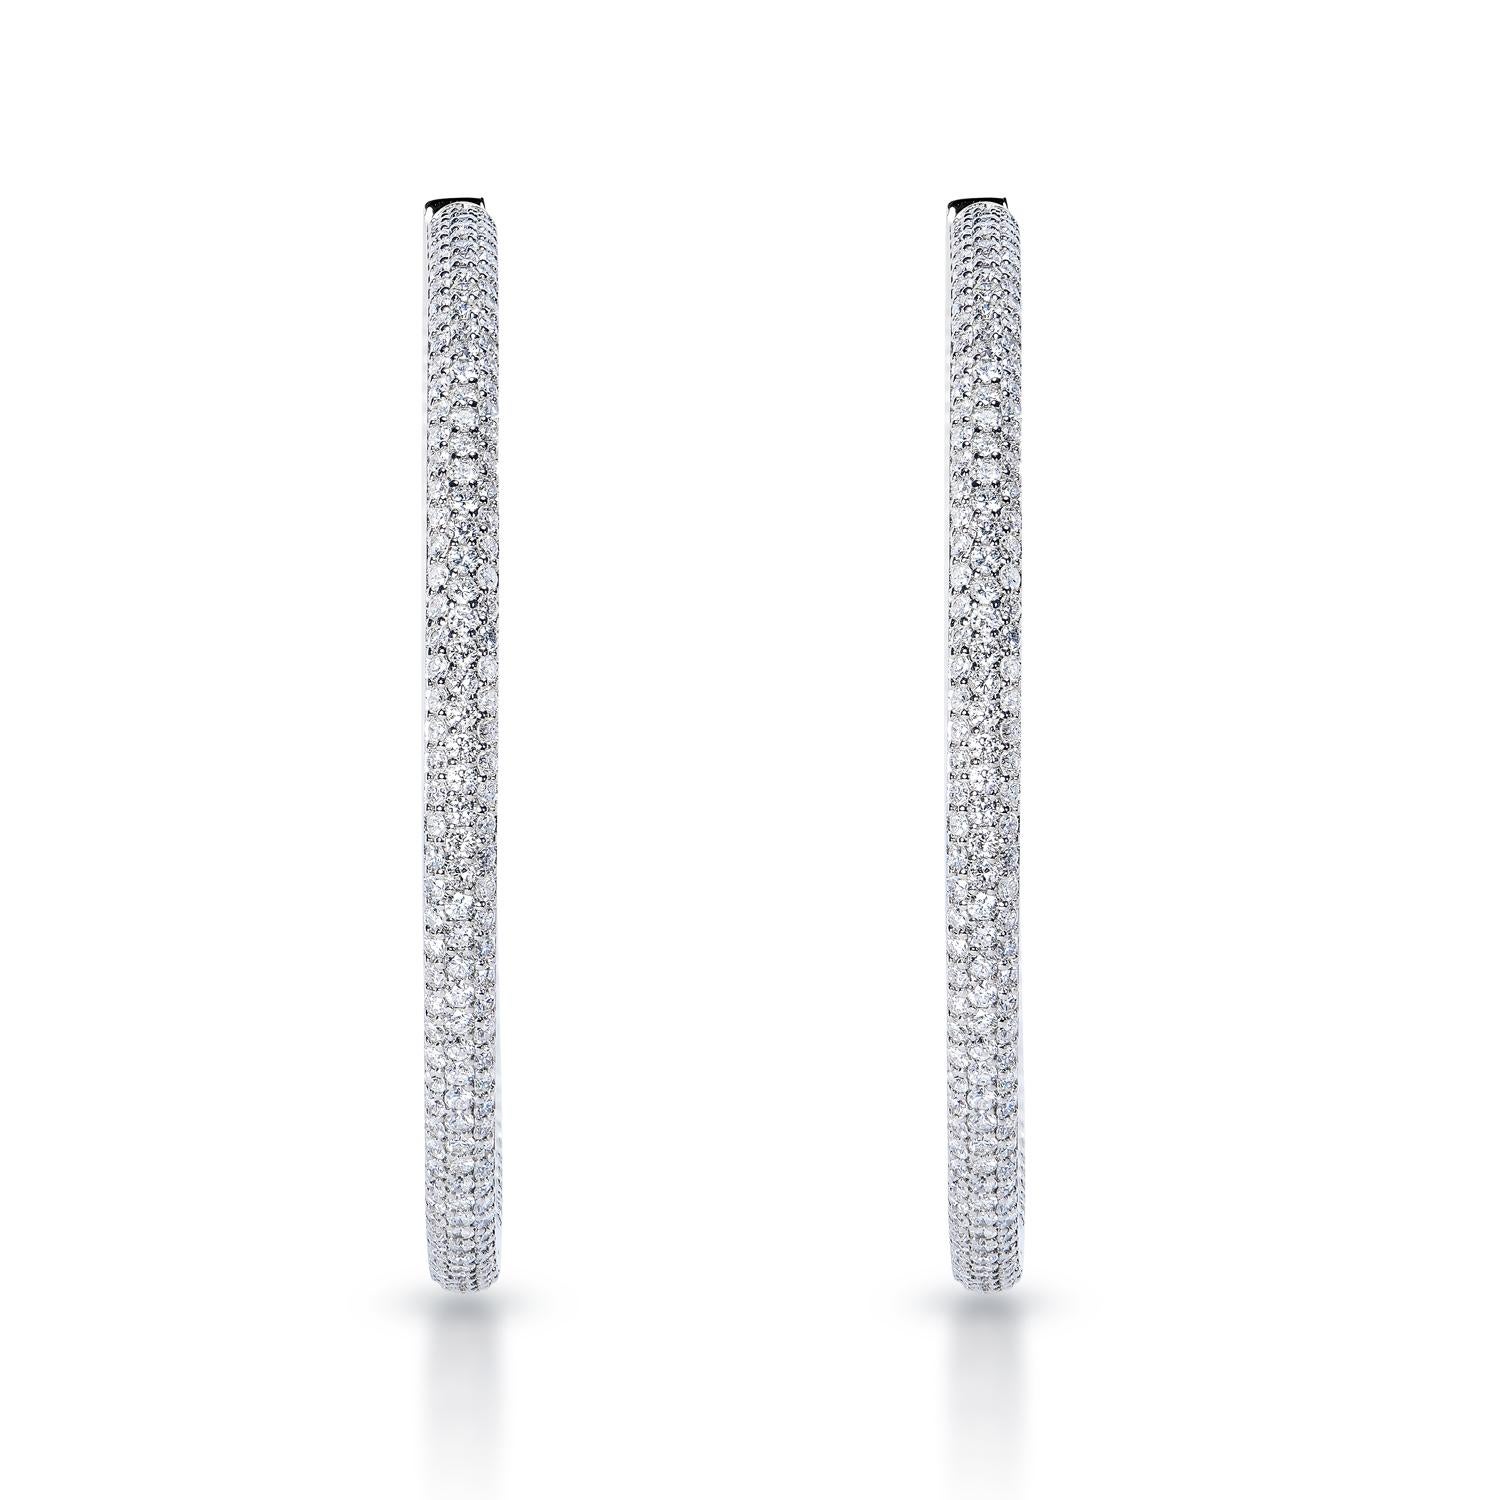 Round Cut 6 Carat Round Brilliant 2 Inch Pave Diamond Hoops Earrings Certified For Sale